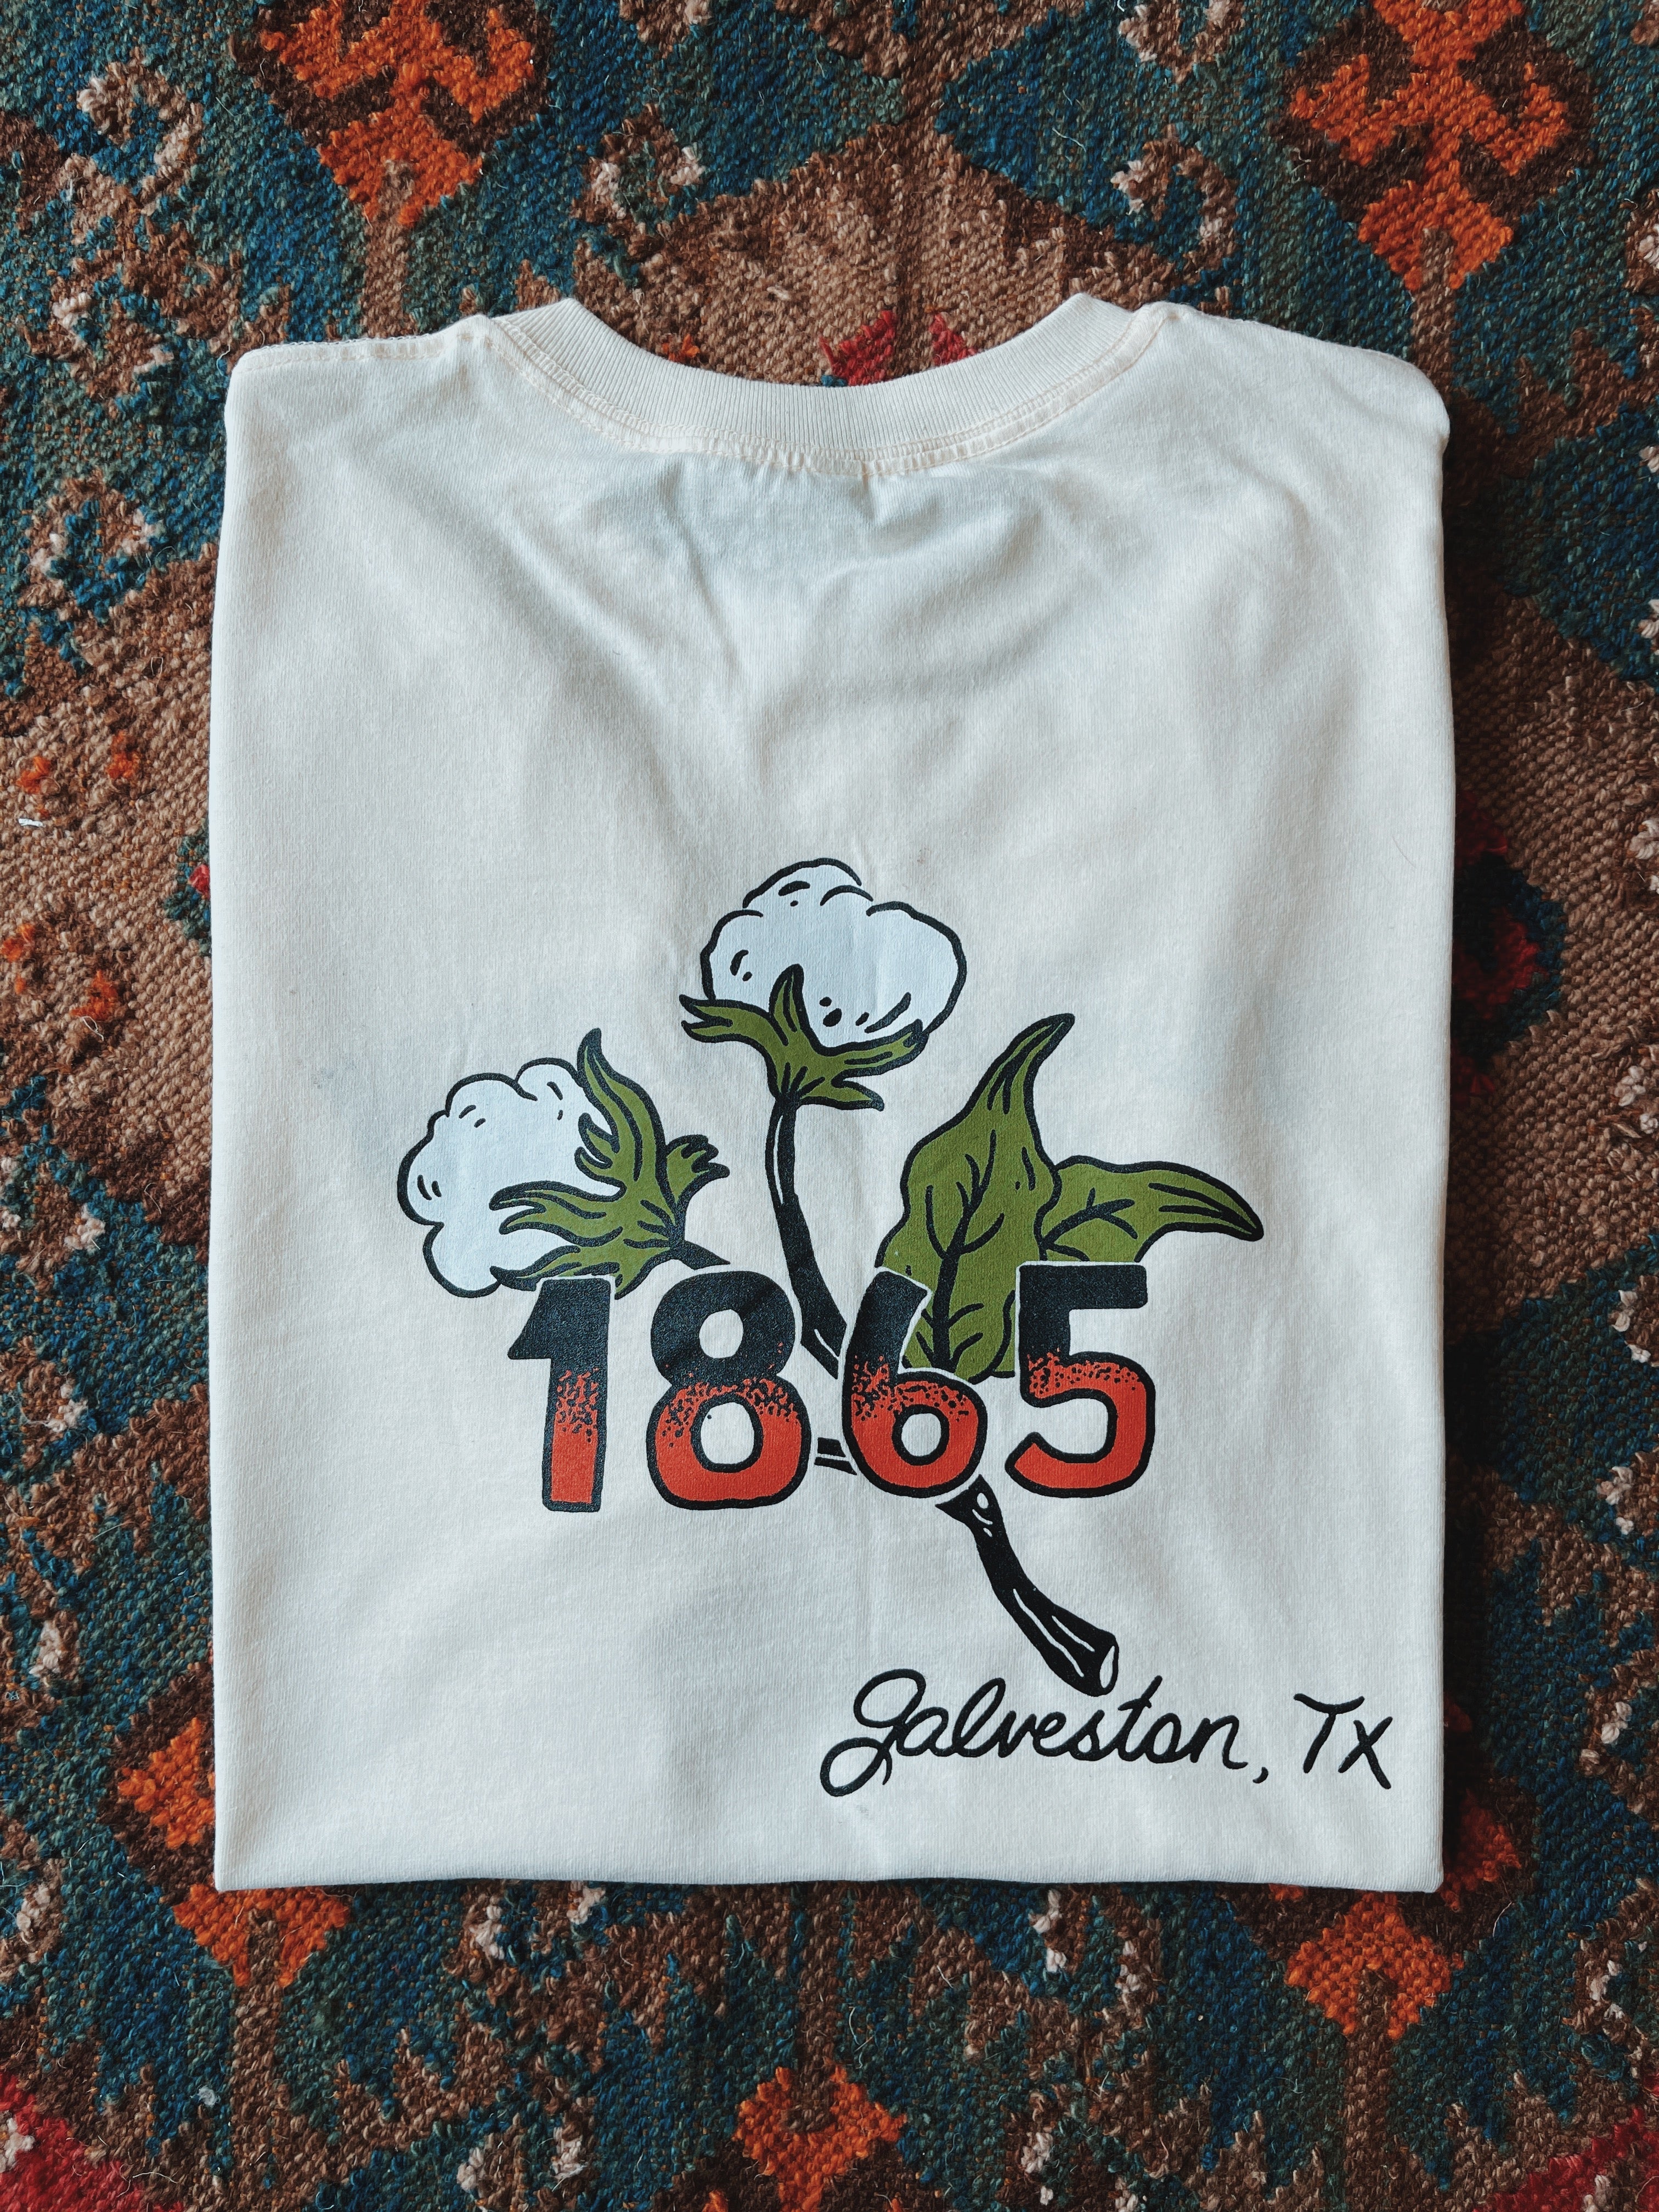 Juneteenth Archive // 2022 Signature Tee